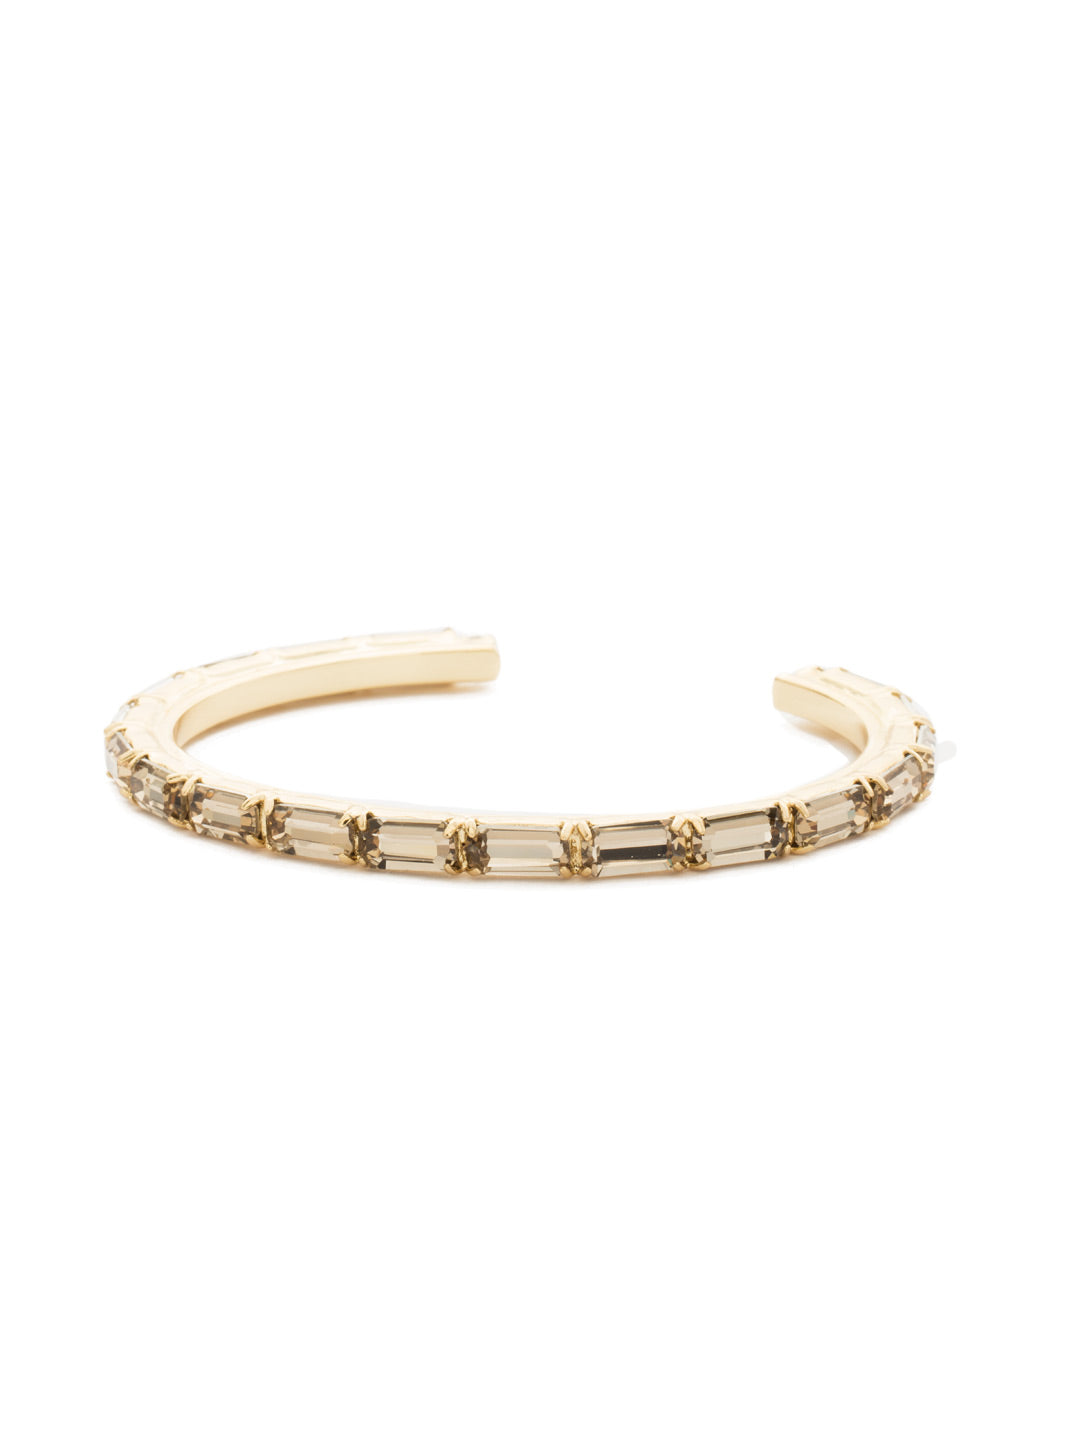 Brilliant Baguette Cuff Bracelet - BDK49BGDCH - <p>This cuff bracelet features repeating crystal baguettes and can be mixed and matched in a myriad of ways. From Sorrelli's Dark Champagne collection in our Bright Gold-tone finish.</p>